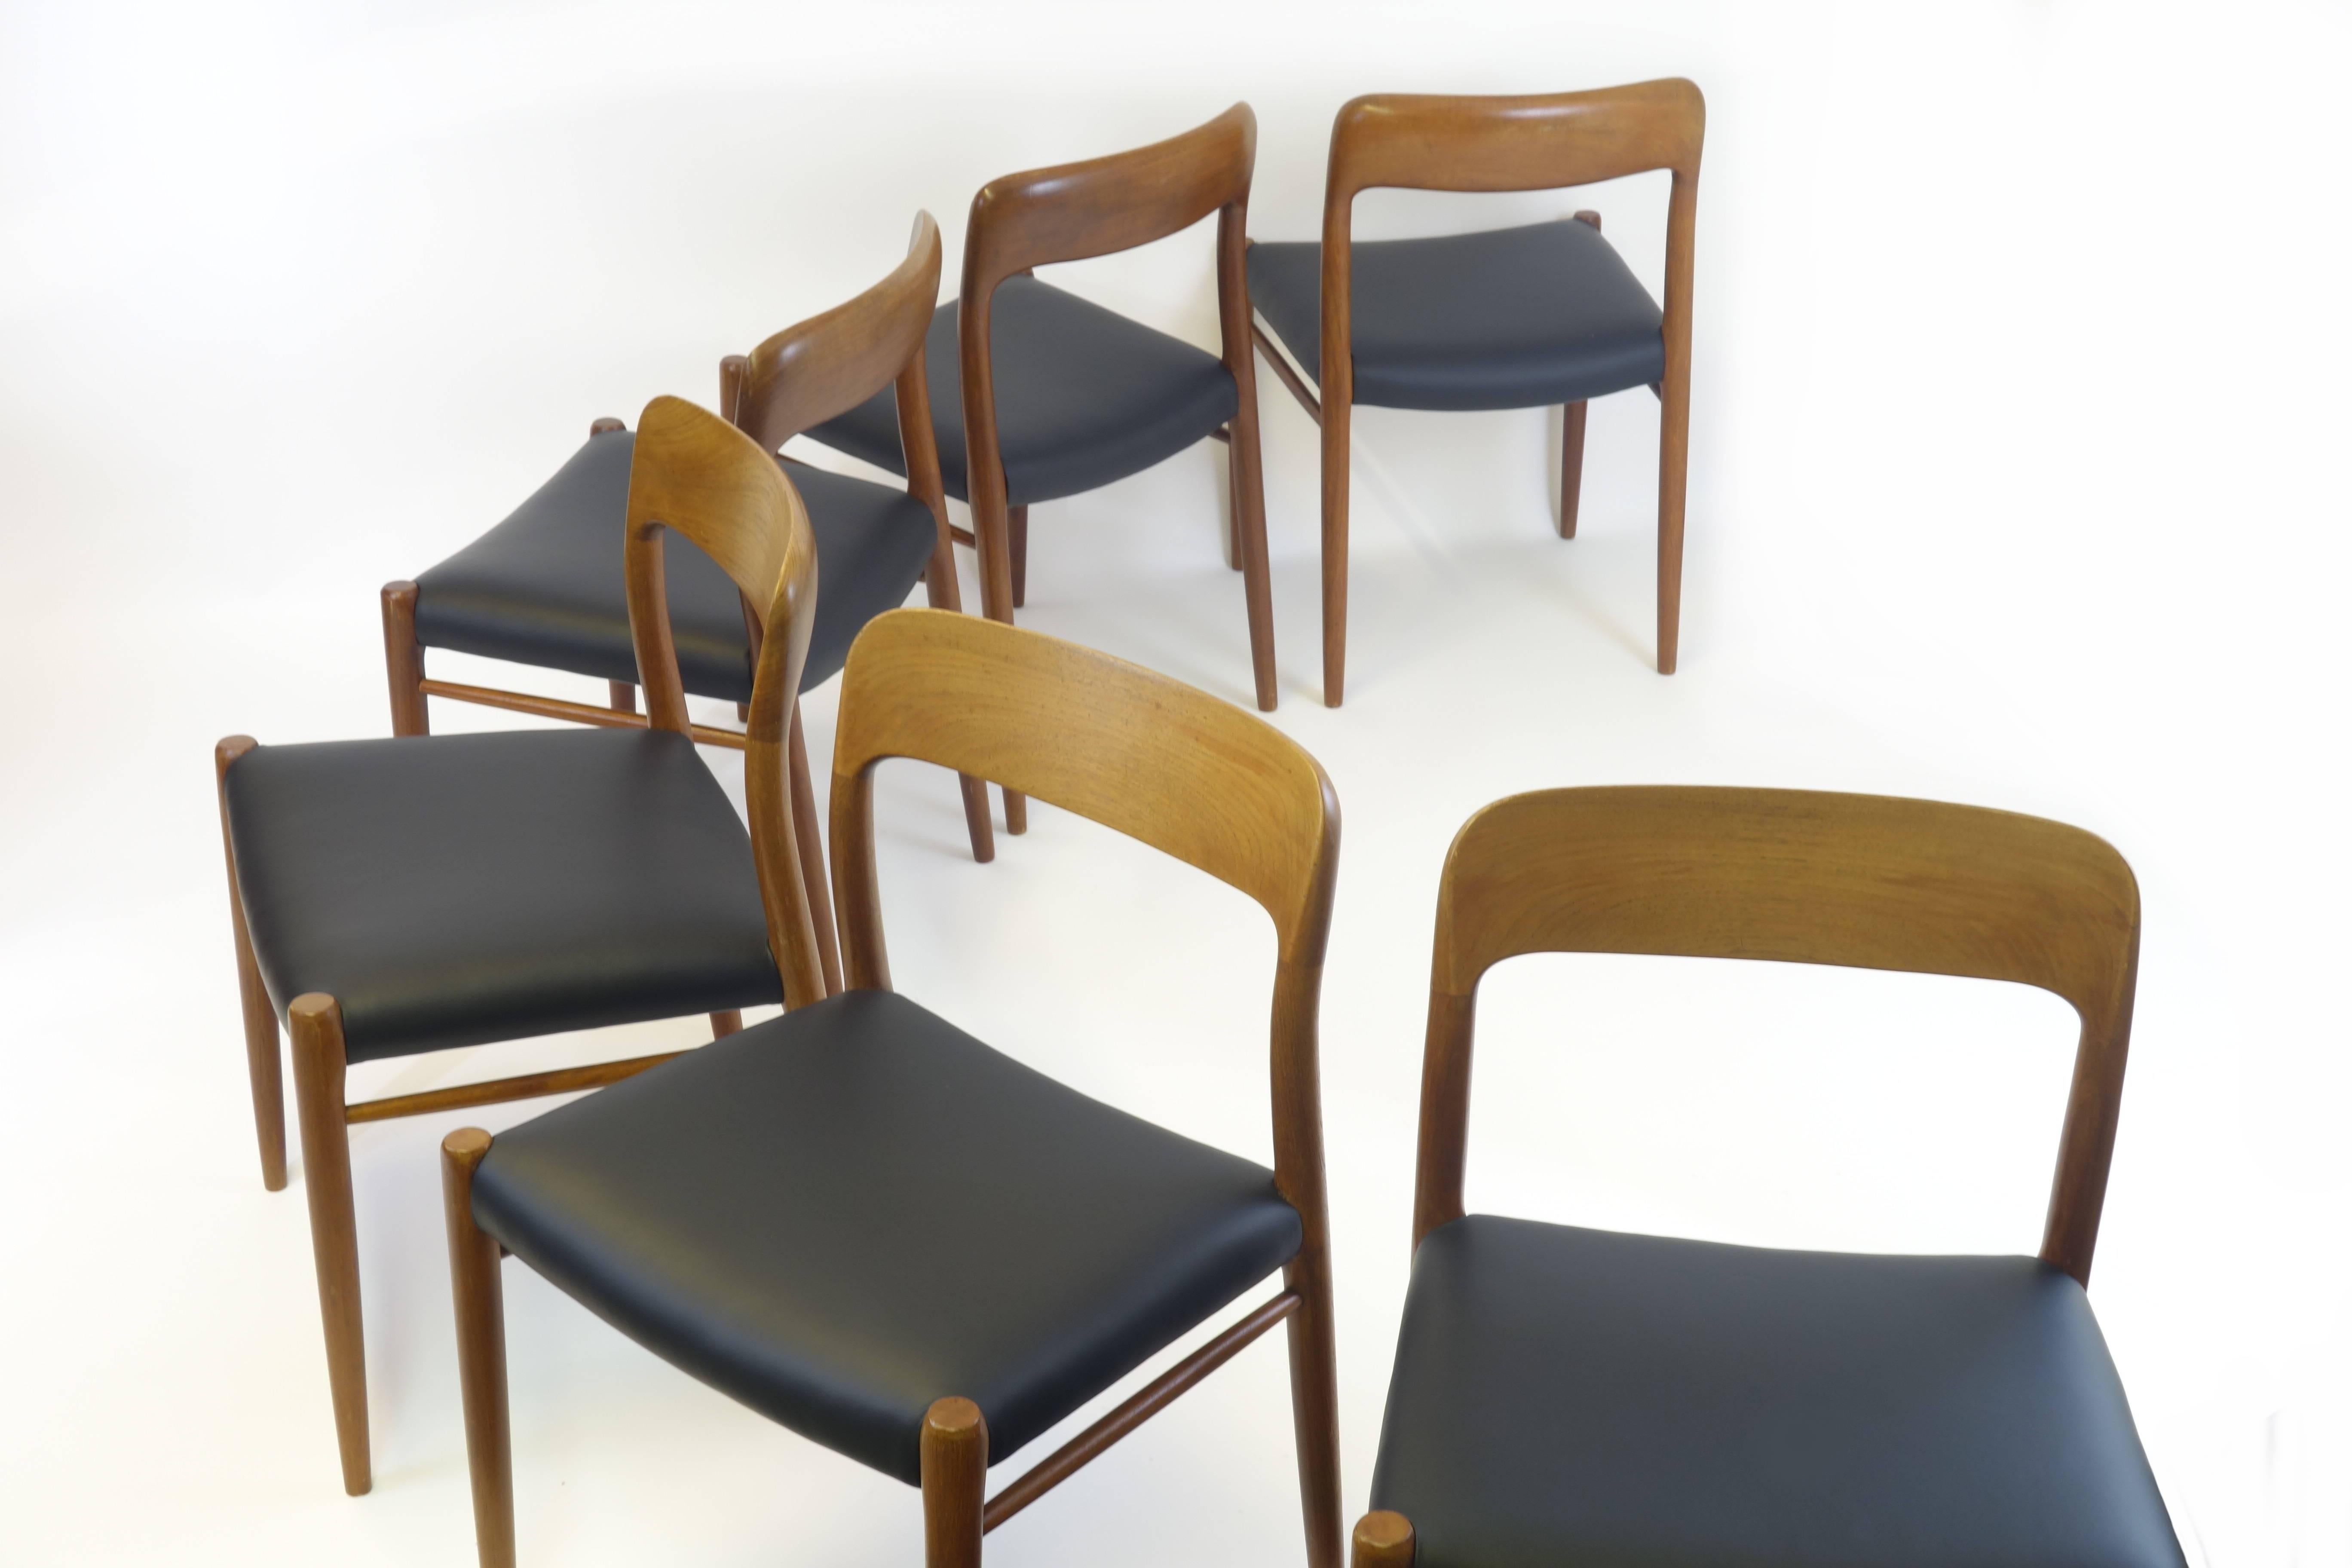 Six exquisite original chairs by J. L. Moeller, Denmark 1960s; elegantly rounded teak wood frame with organically flowing appearance and marvellous fitting quality. These chairs have been warily and carefully refurbished. Their new upholstery in